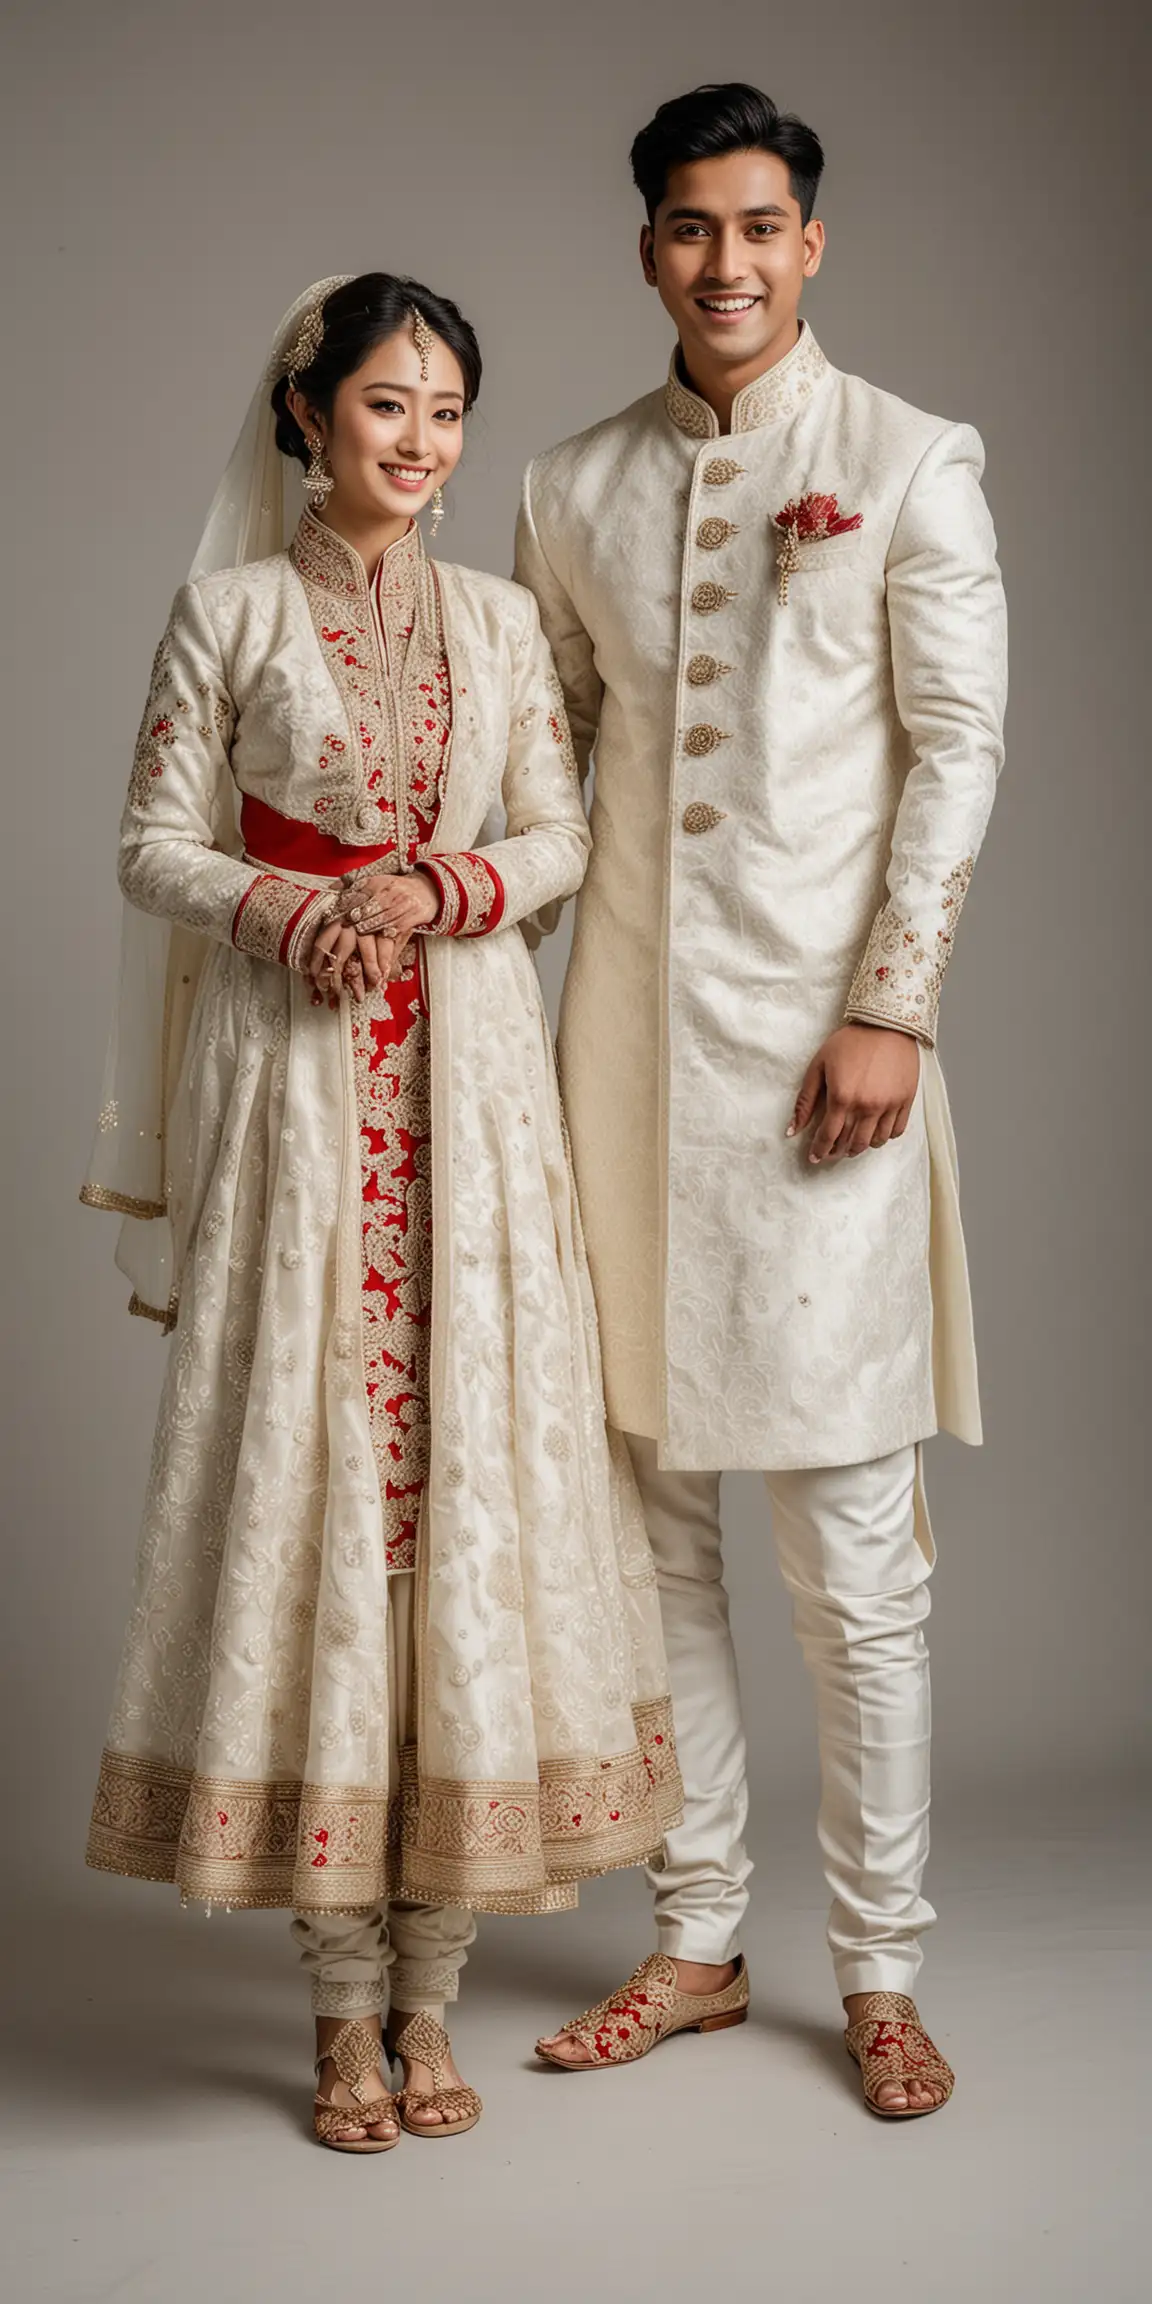 CrossCultural Wedding Korean Bride in Traditional White Outfit and Indian Groom in Sherwani